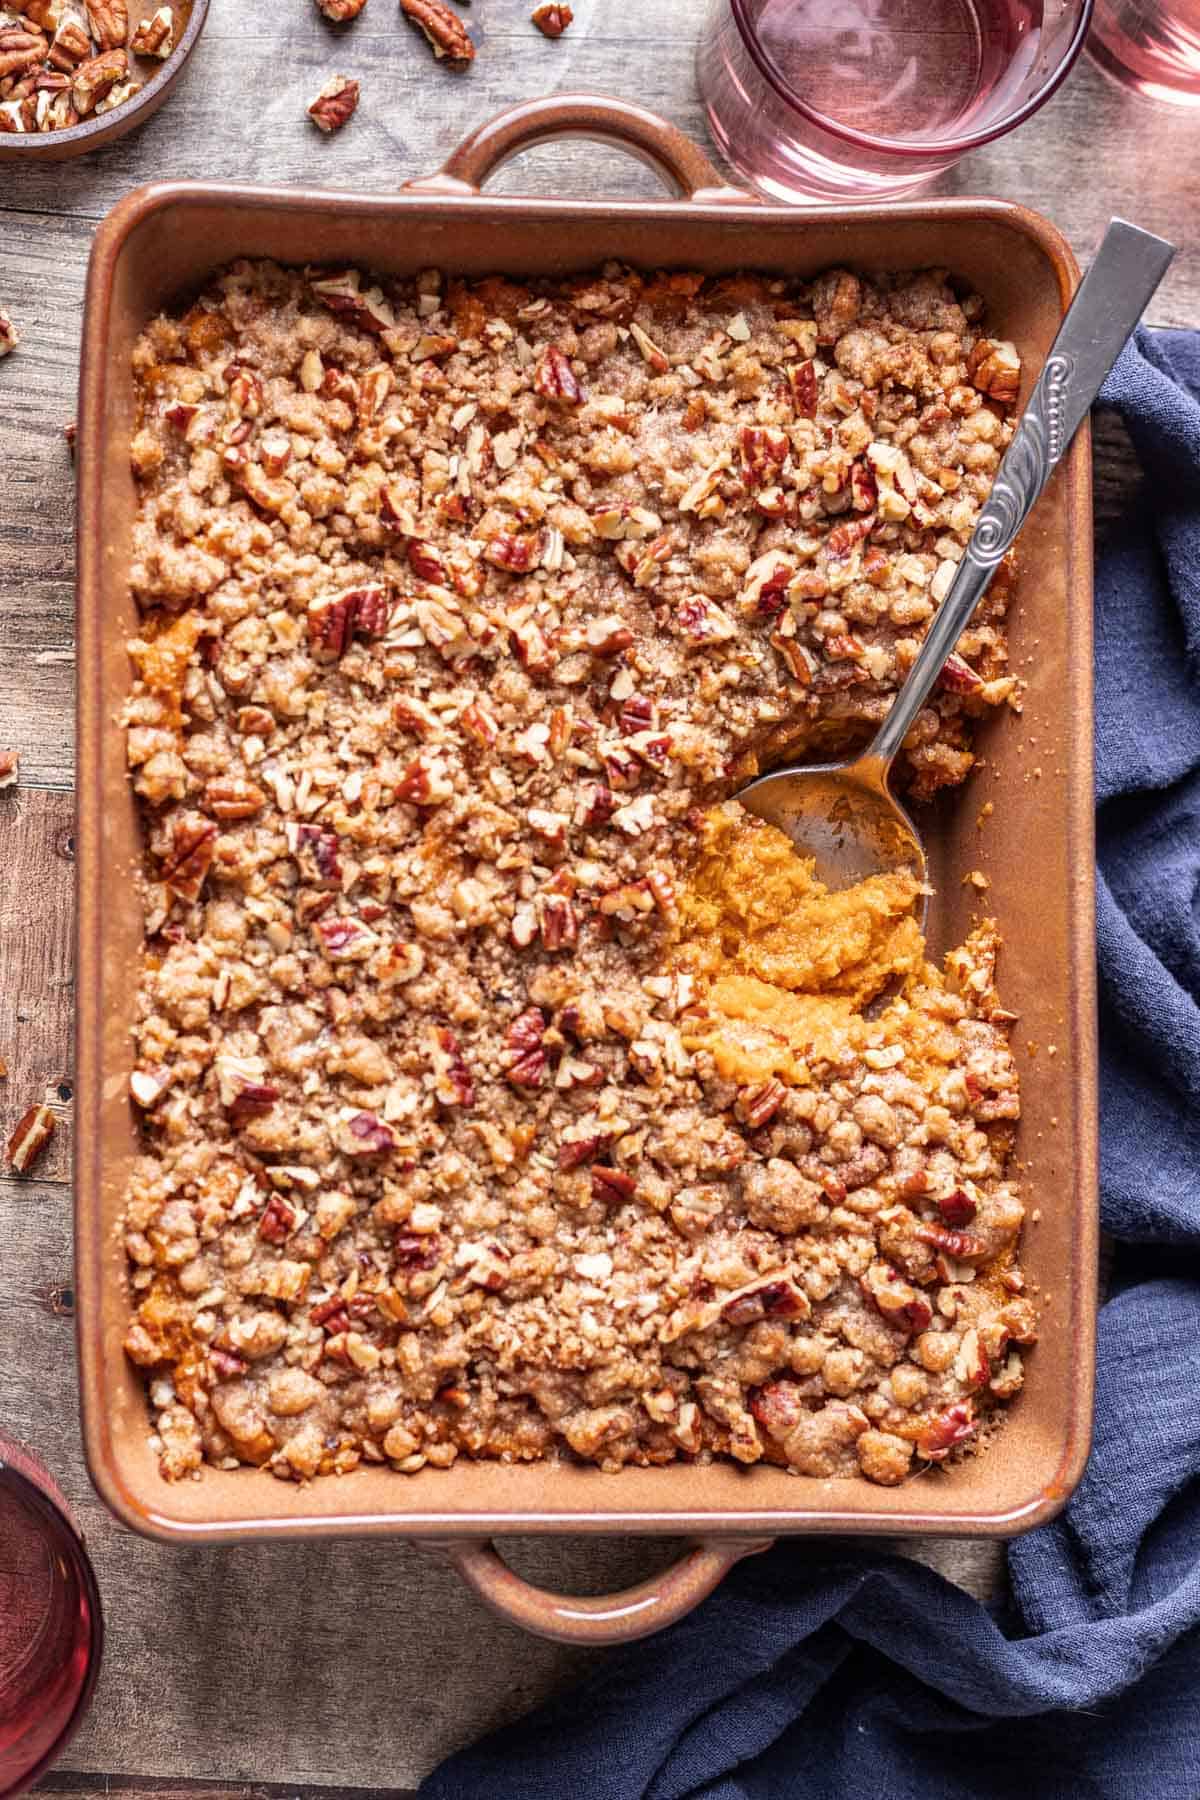 Sweet potato crunch casserole in a brown baking dish with a spoon scooping some out.